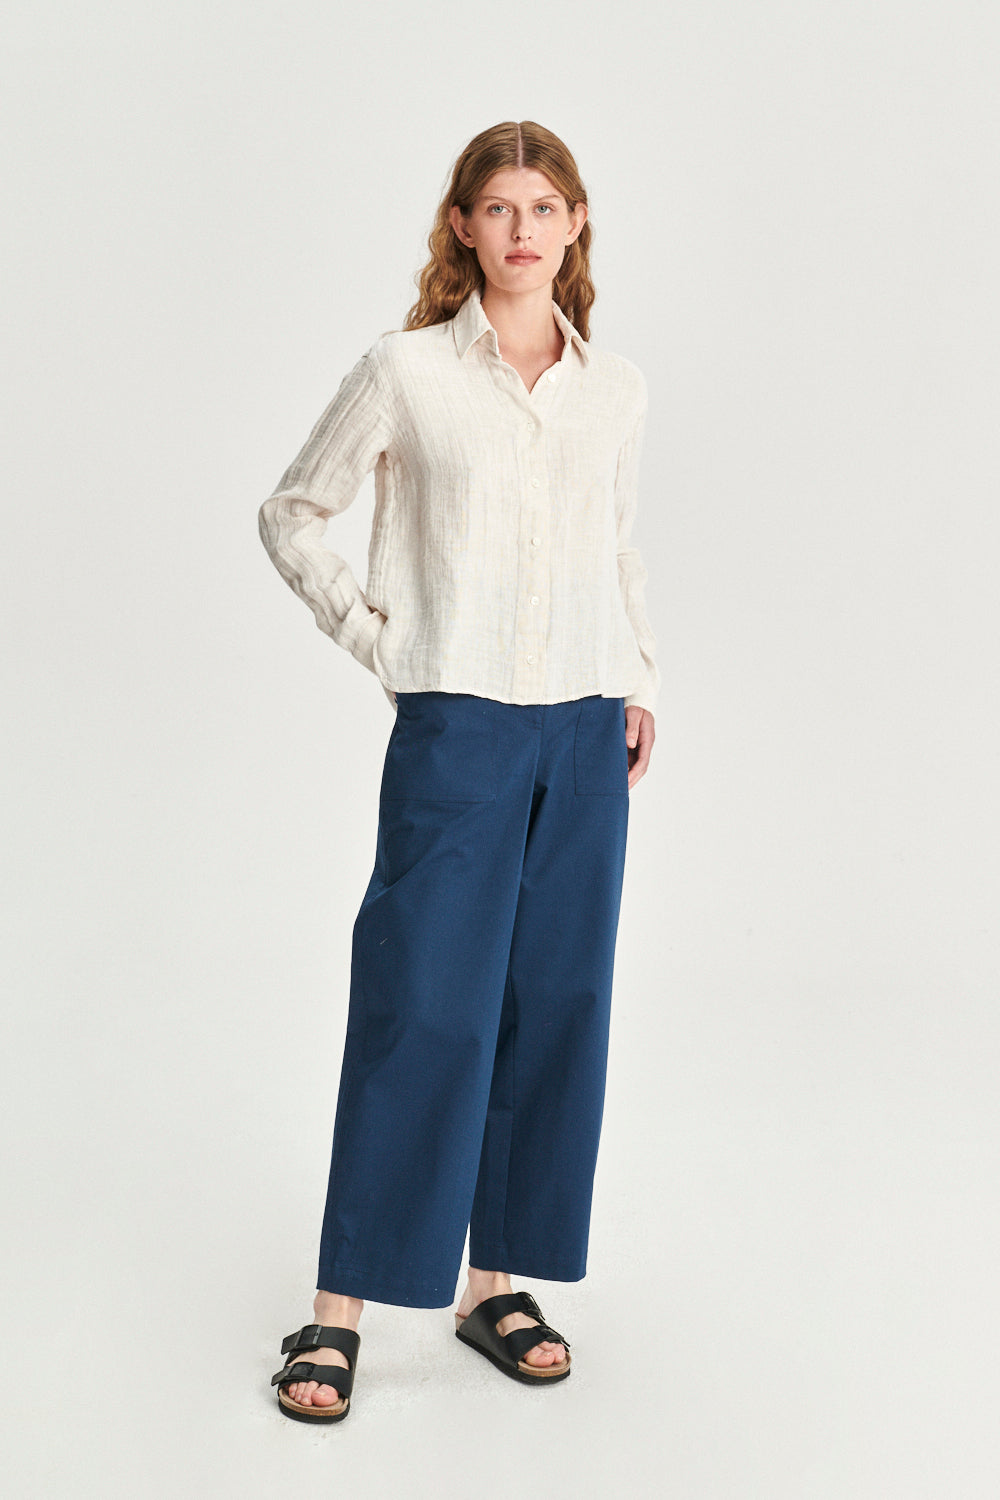 Relaxed Shirt in a Double Sided Off-White Fatigue Italian Linen and Cotton